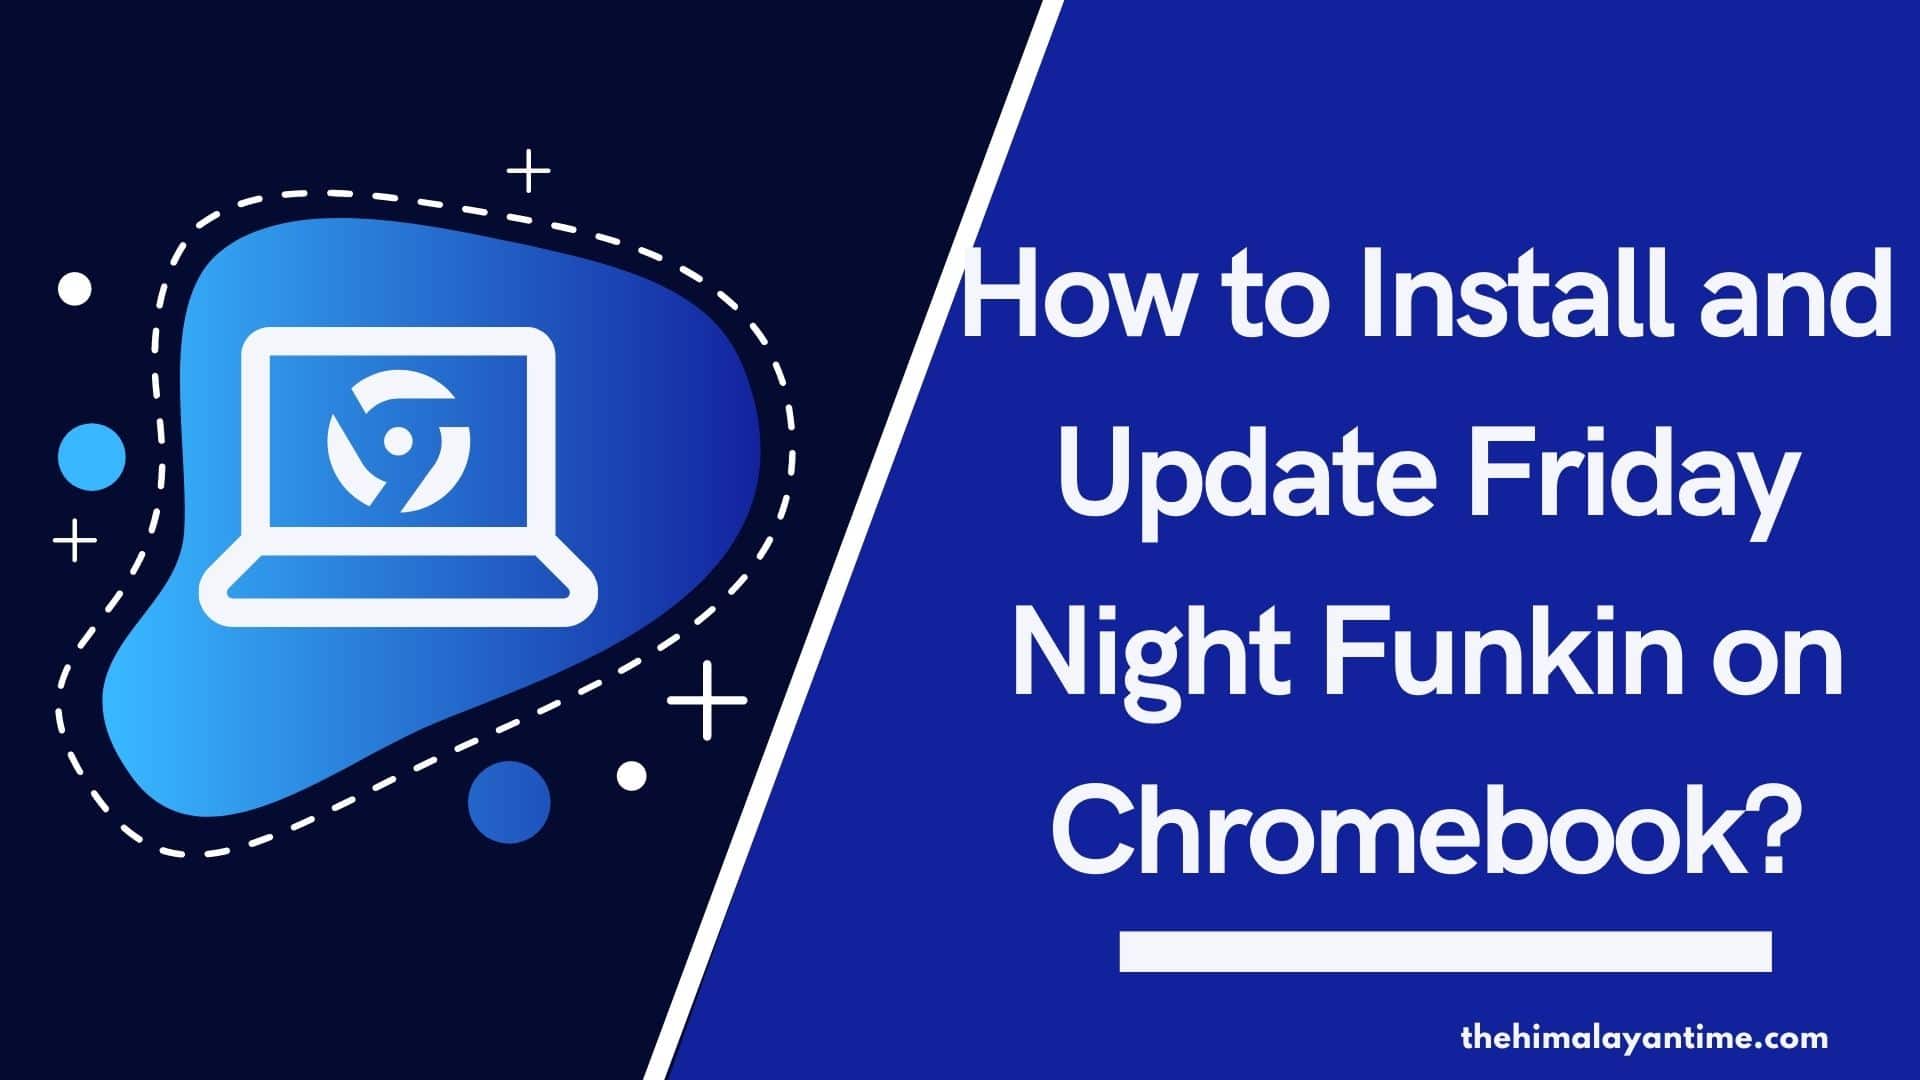 install and update Friday Night Funkin on Chromebook